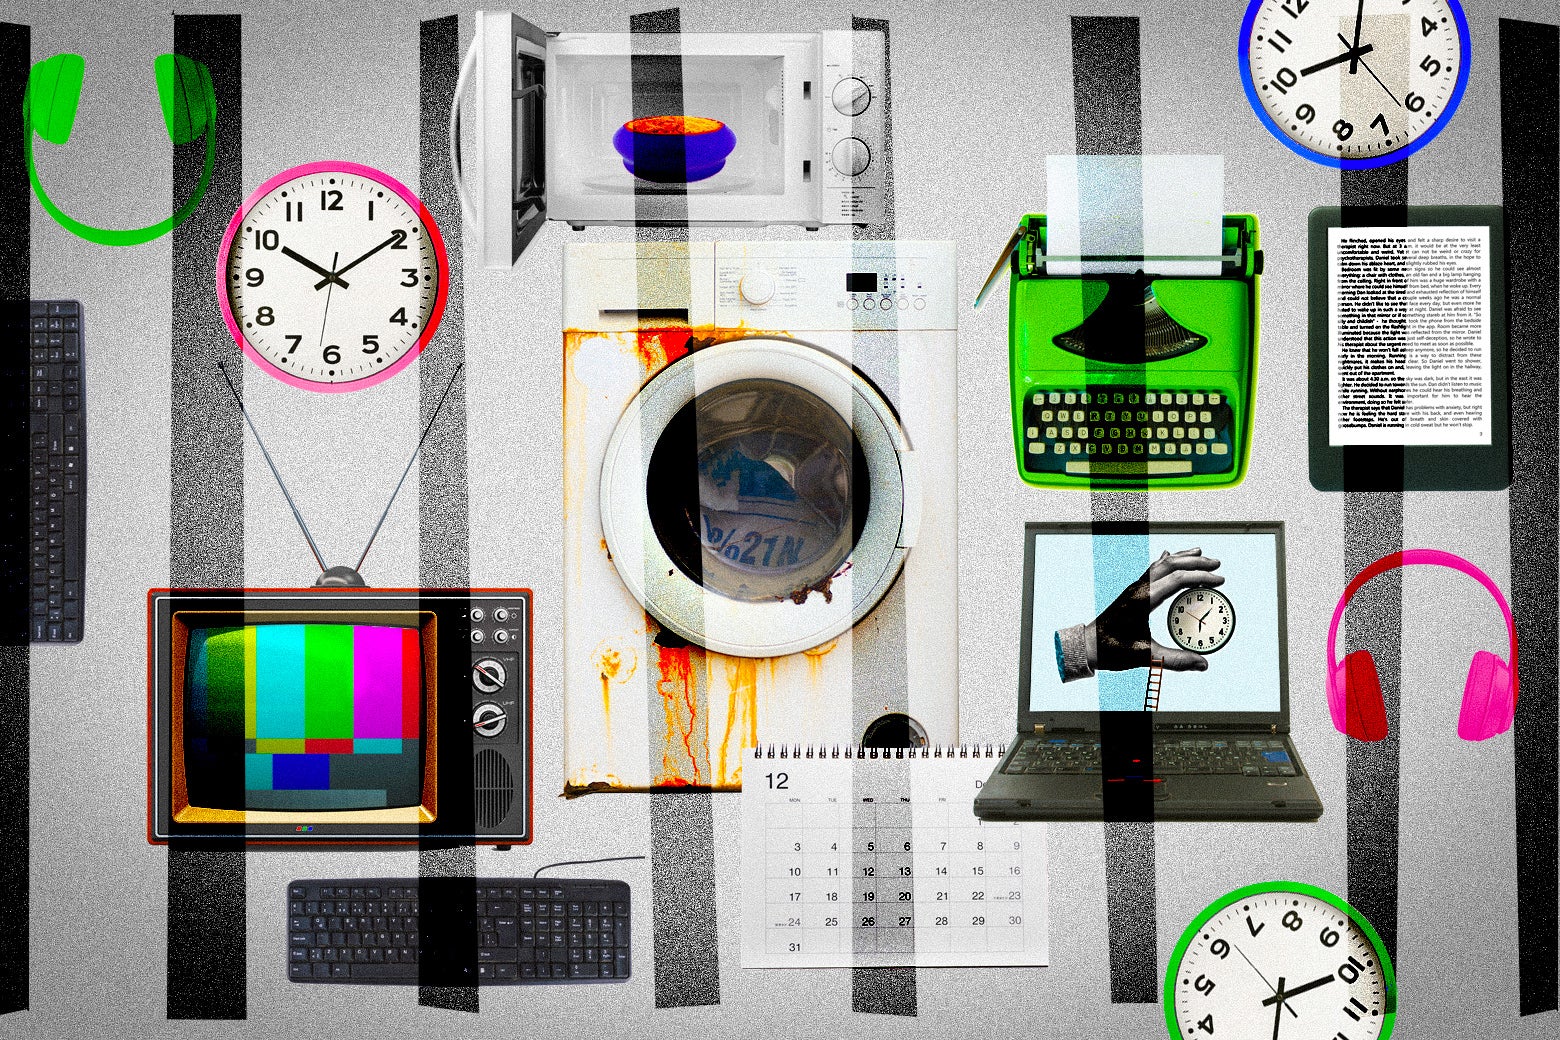 A collage of several objects including: wall clocks, headphones, a calendar, a washing machine, a microwave, a computer, a keyboard, a tablet text reader. Over the illustration is the shadow of prison bars.